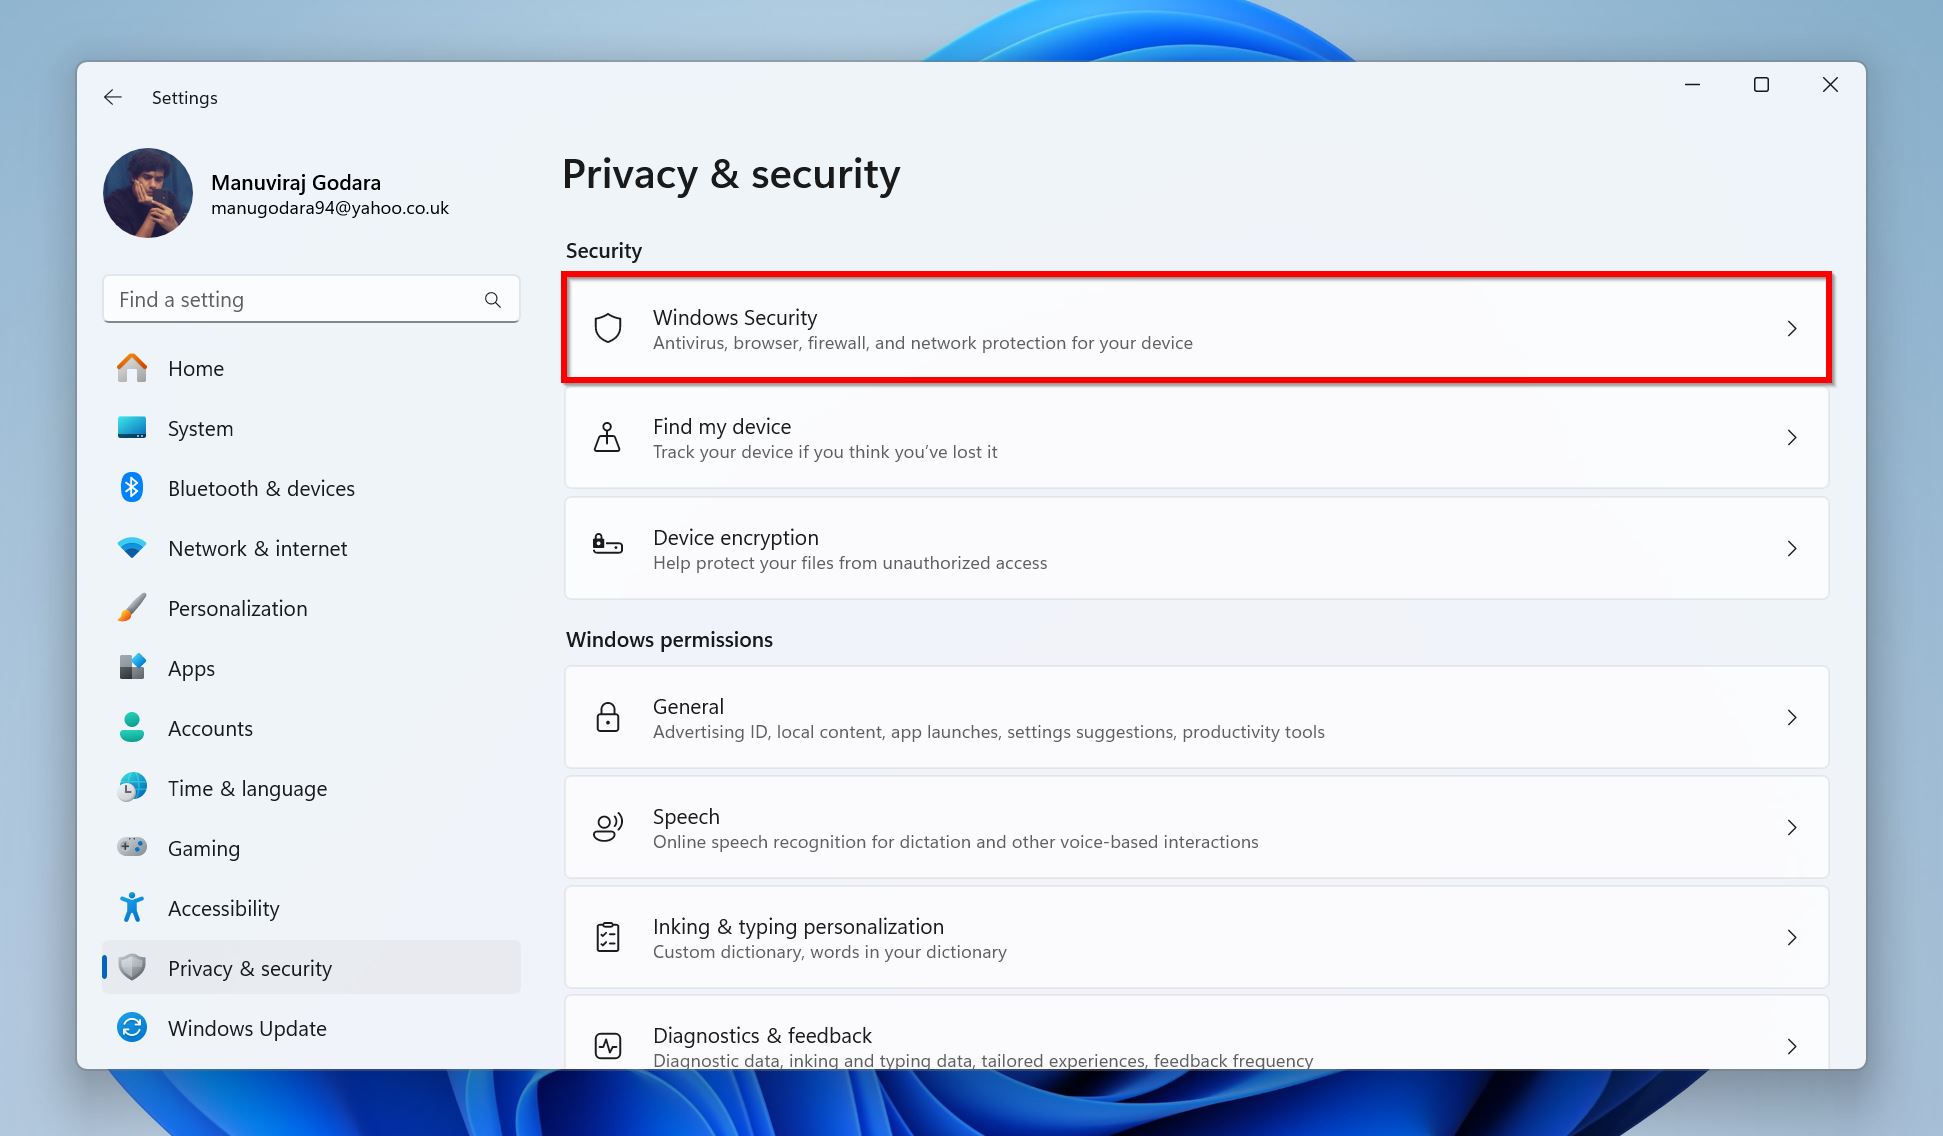 Windows Settings screen showing Privacy & security section with a focus on Security settings including Windows Security.